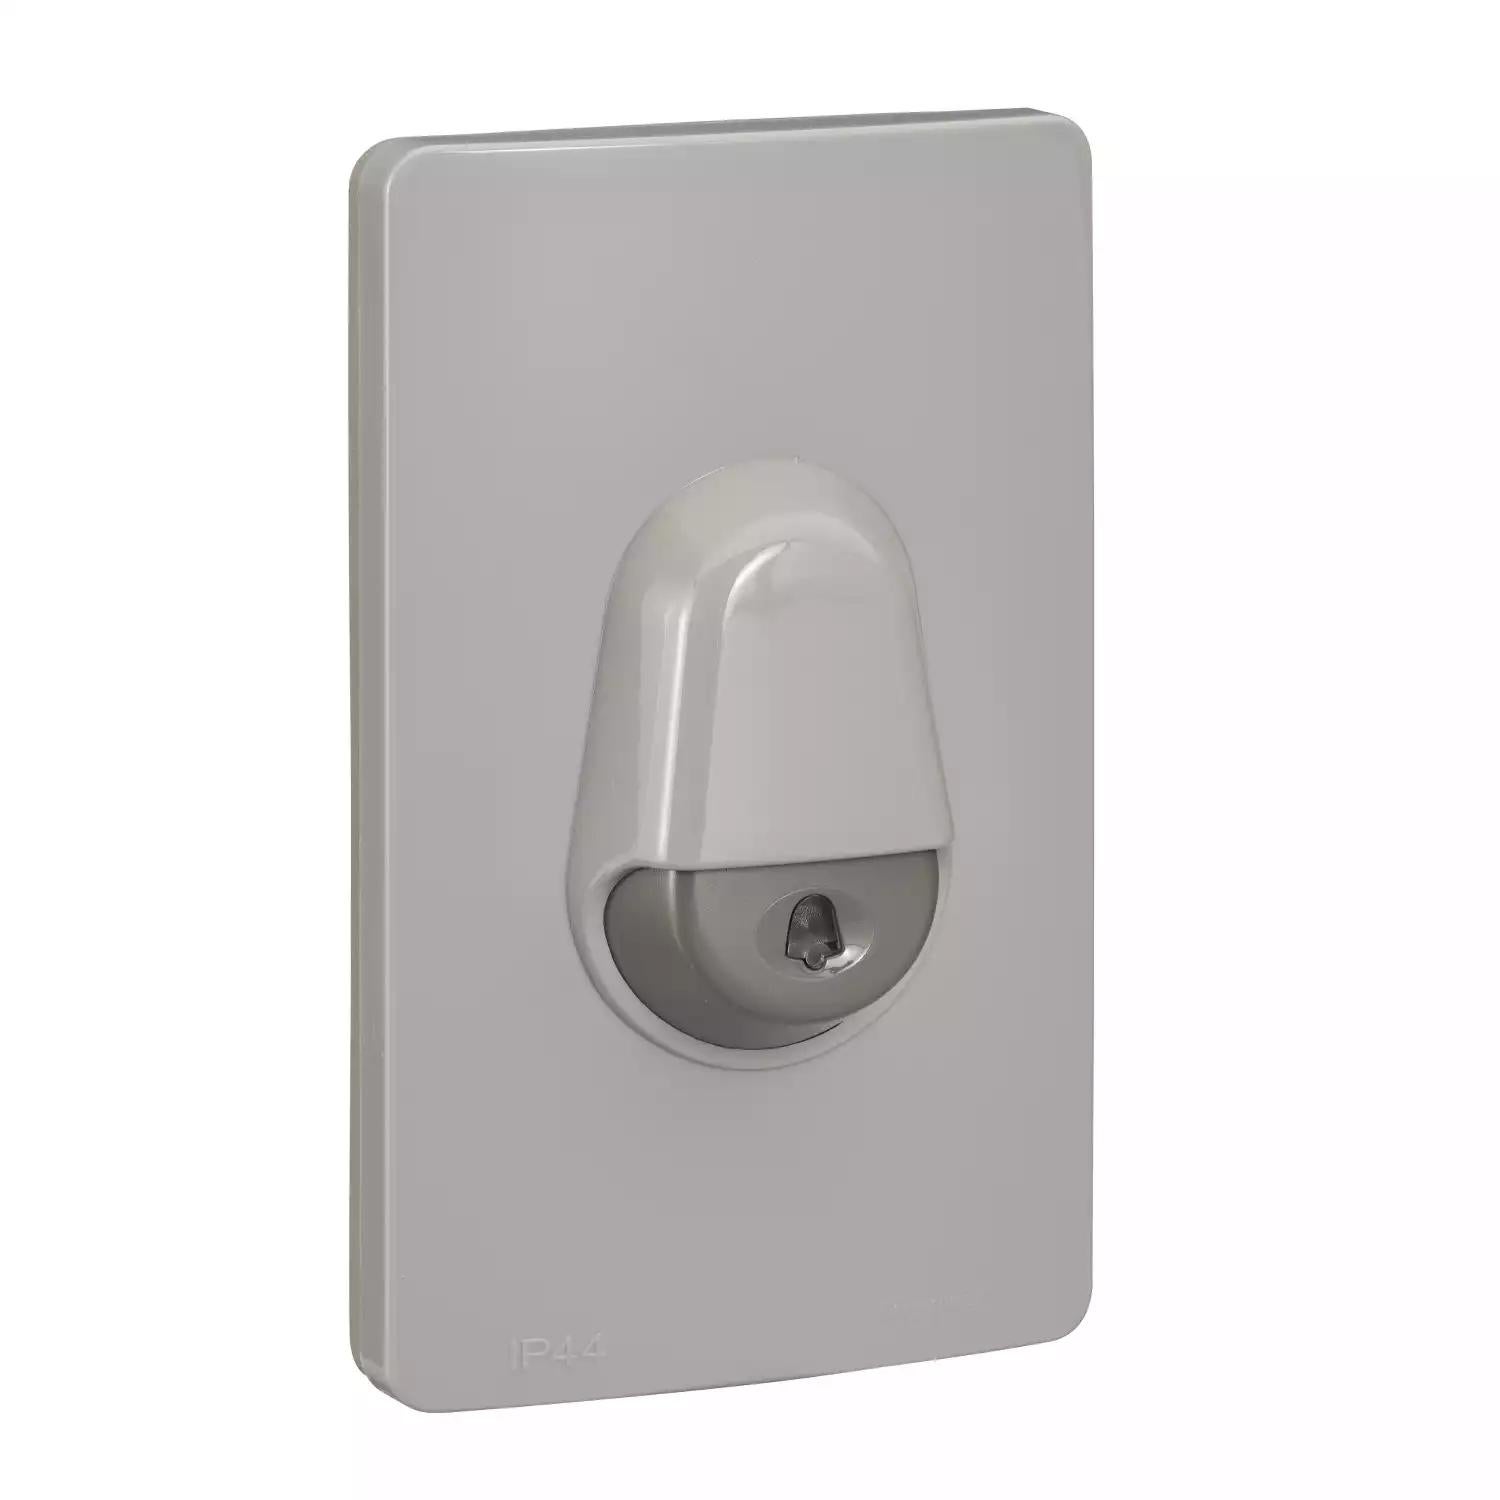 Kavacha - Surface Mounted Door Bell with LED Indicator - Grey - IP44